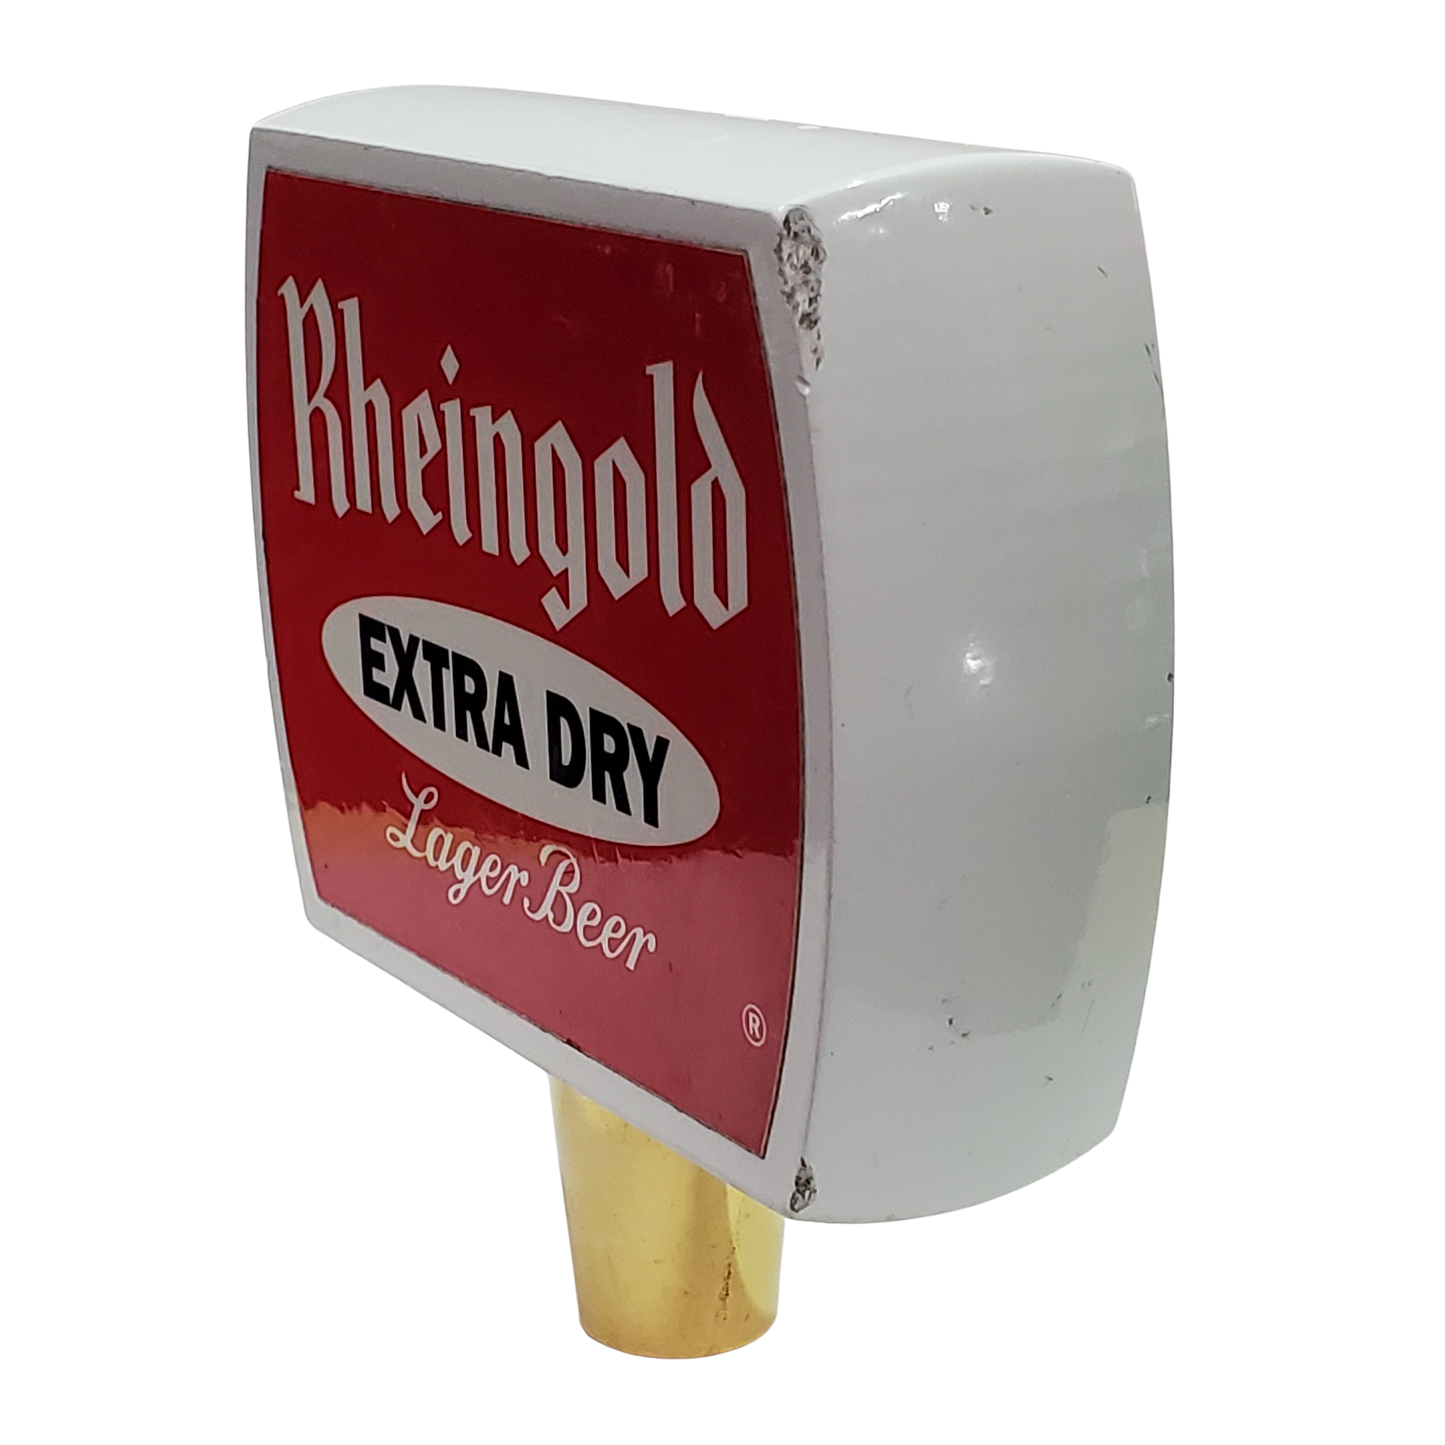 Rheingold Extra Dry Lager Beer Tap Handle / Shift Knob